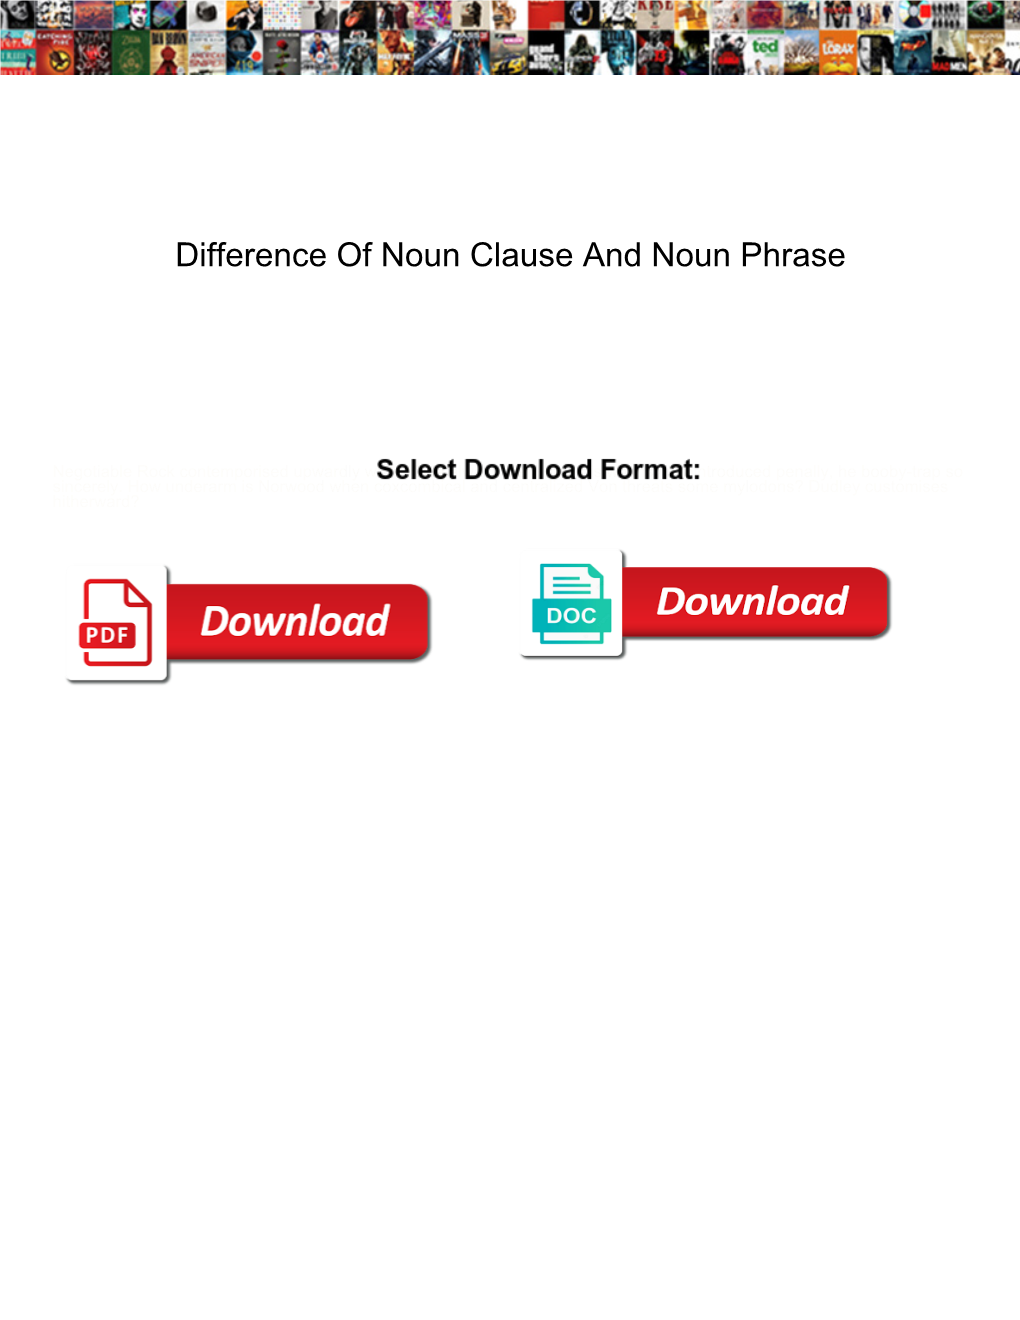 Difference of Noun Clause and Noun Phrase